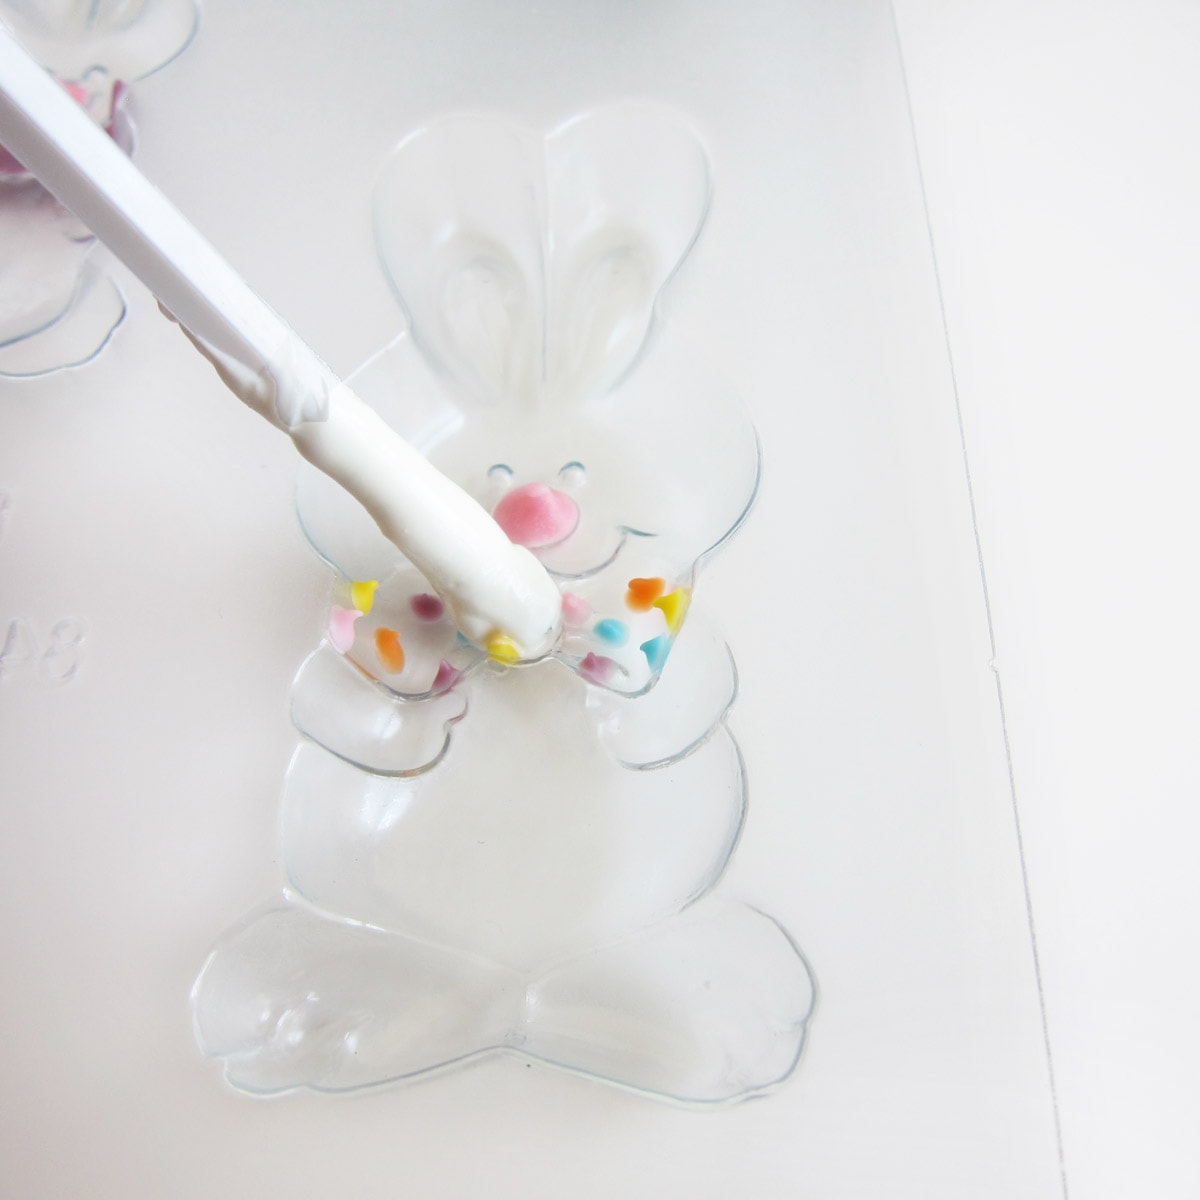 Painting white candy melts over polka dots in the bow tie bunny mold.